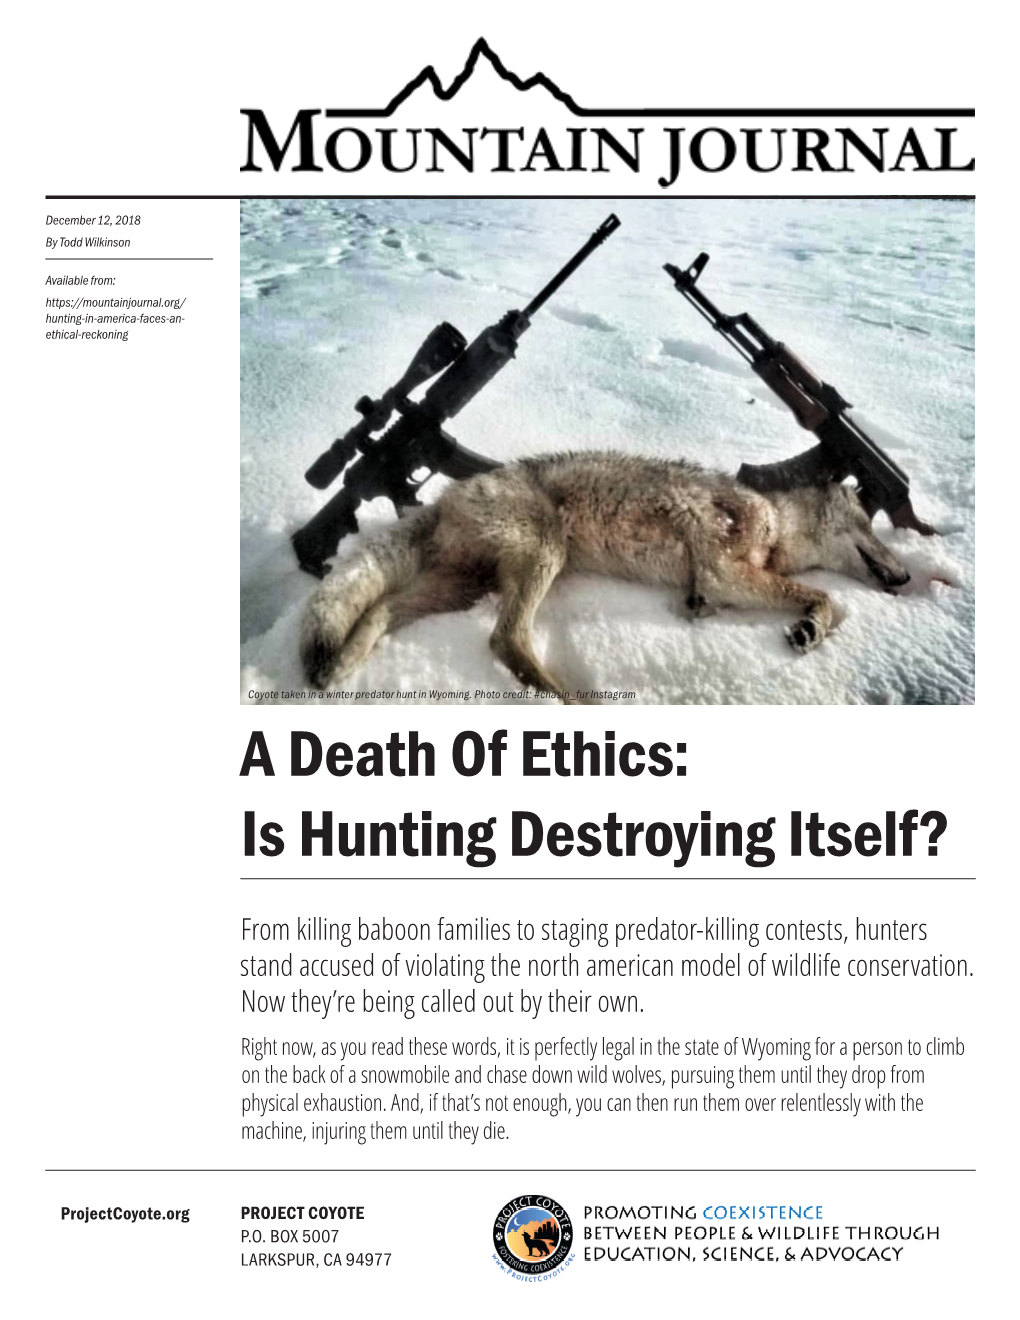 A Death of Ethics: Is Hunting Destroying Itself?